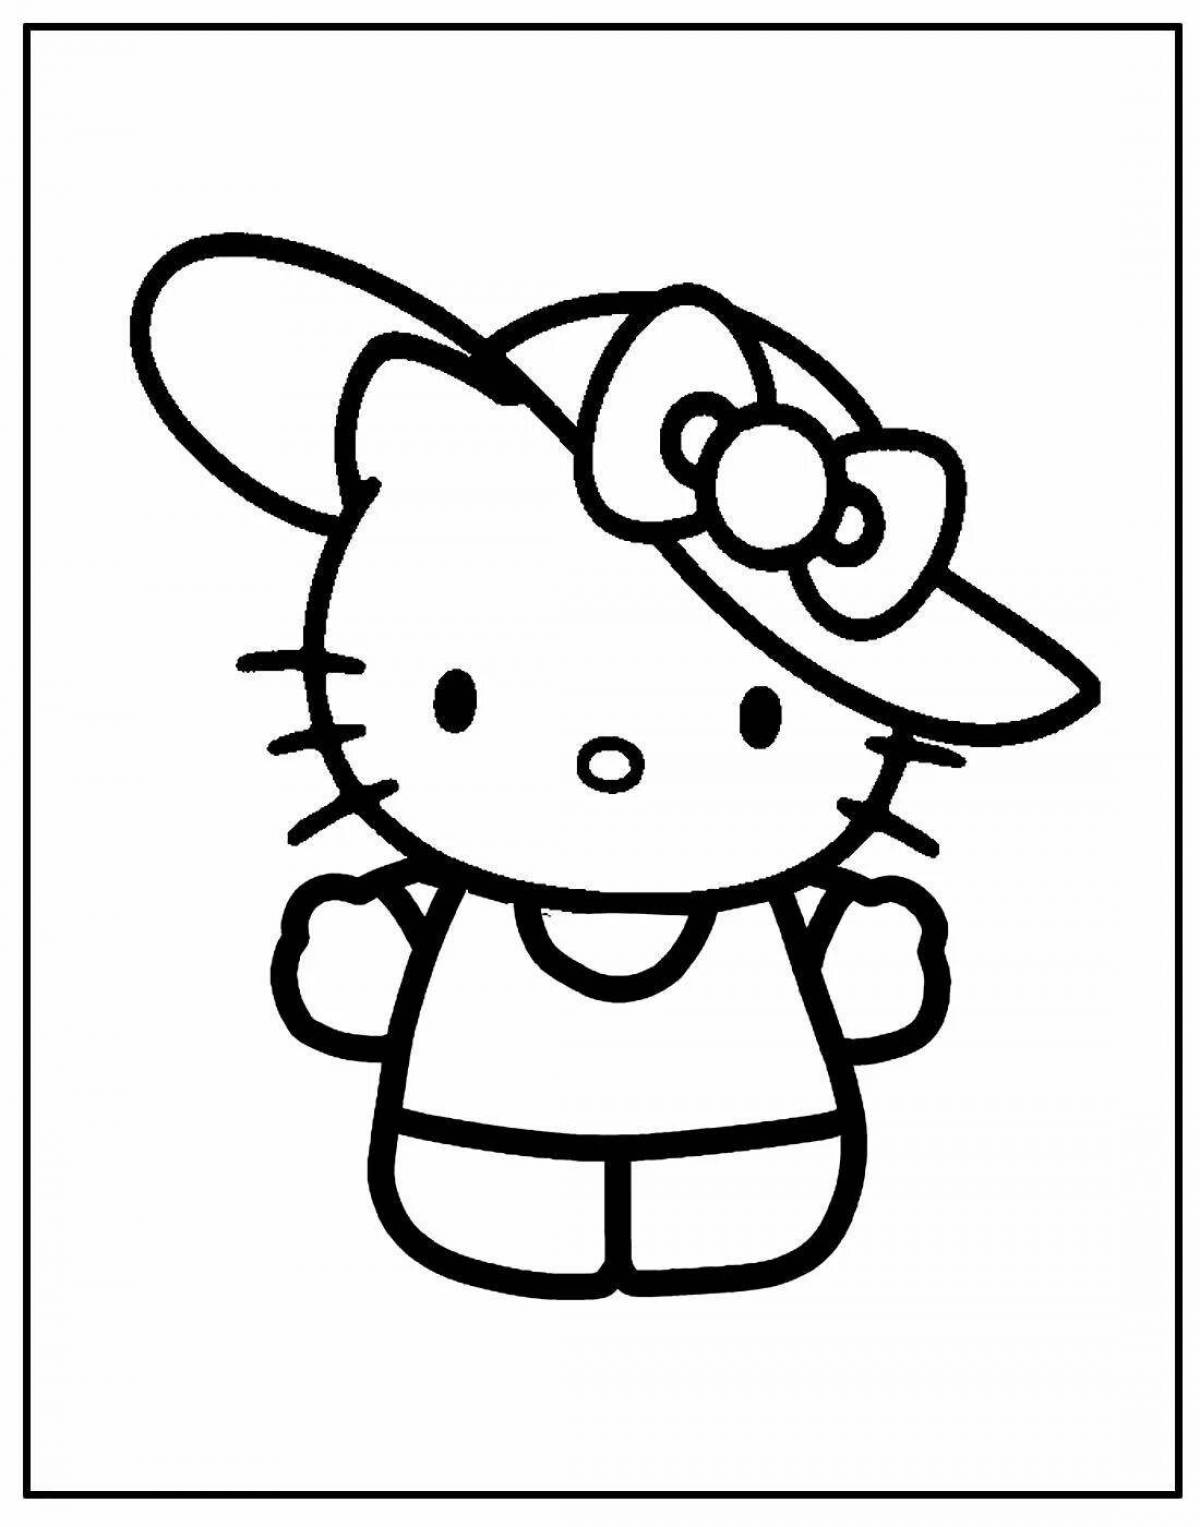 Colorful hello kitty coloring book